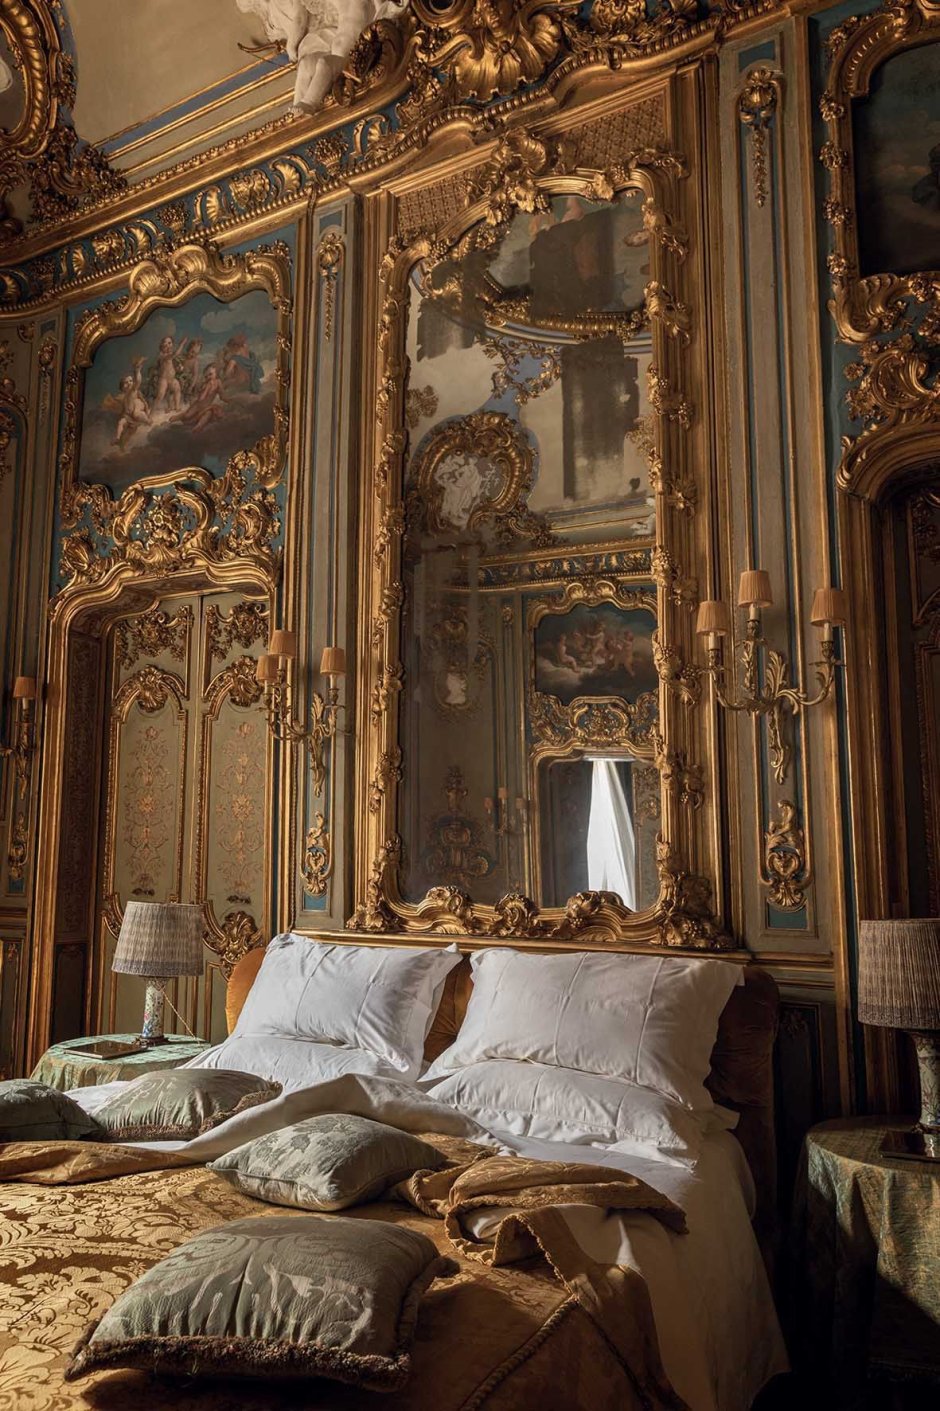 Bedroom in palace